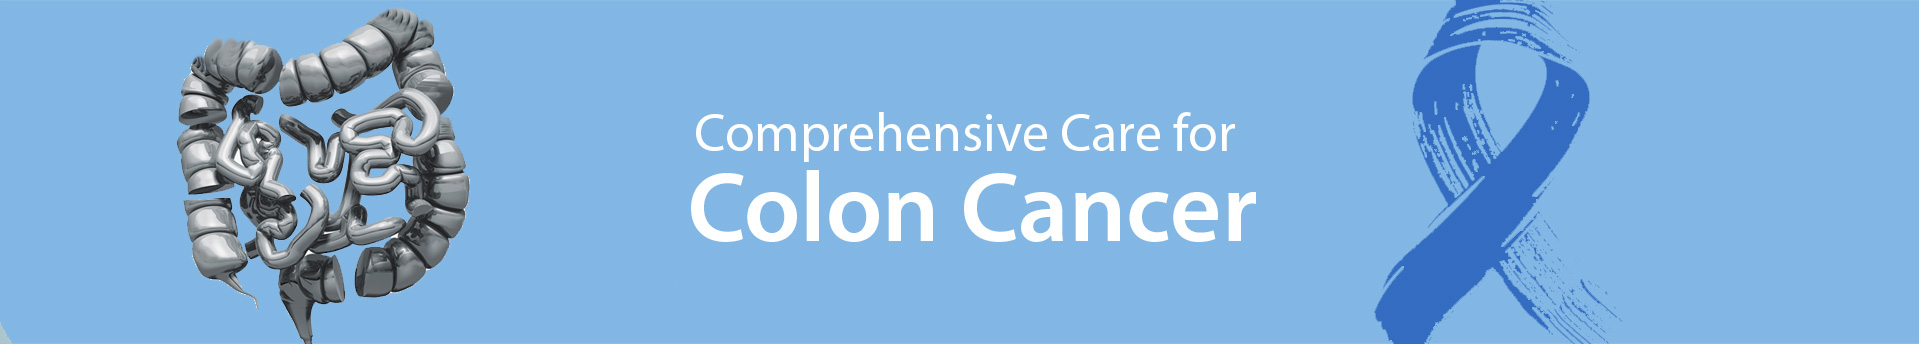 Medicaoncology Colon Cancer